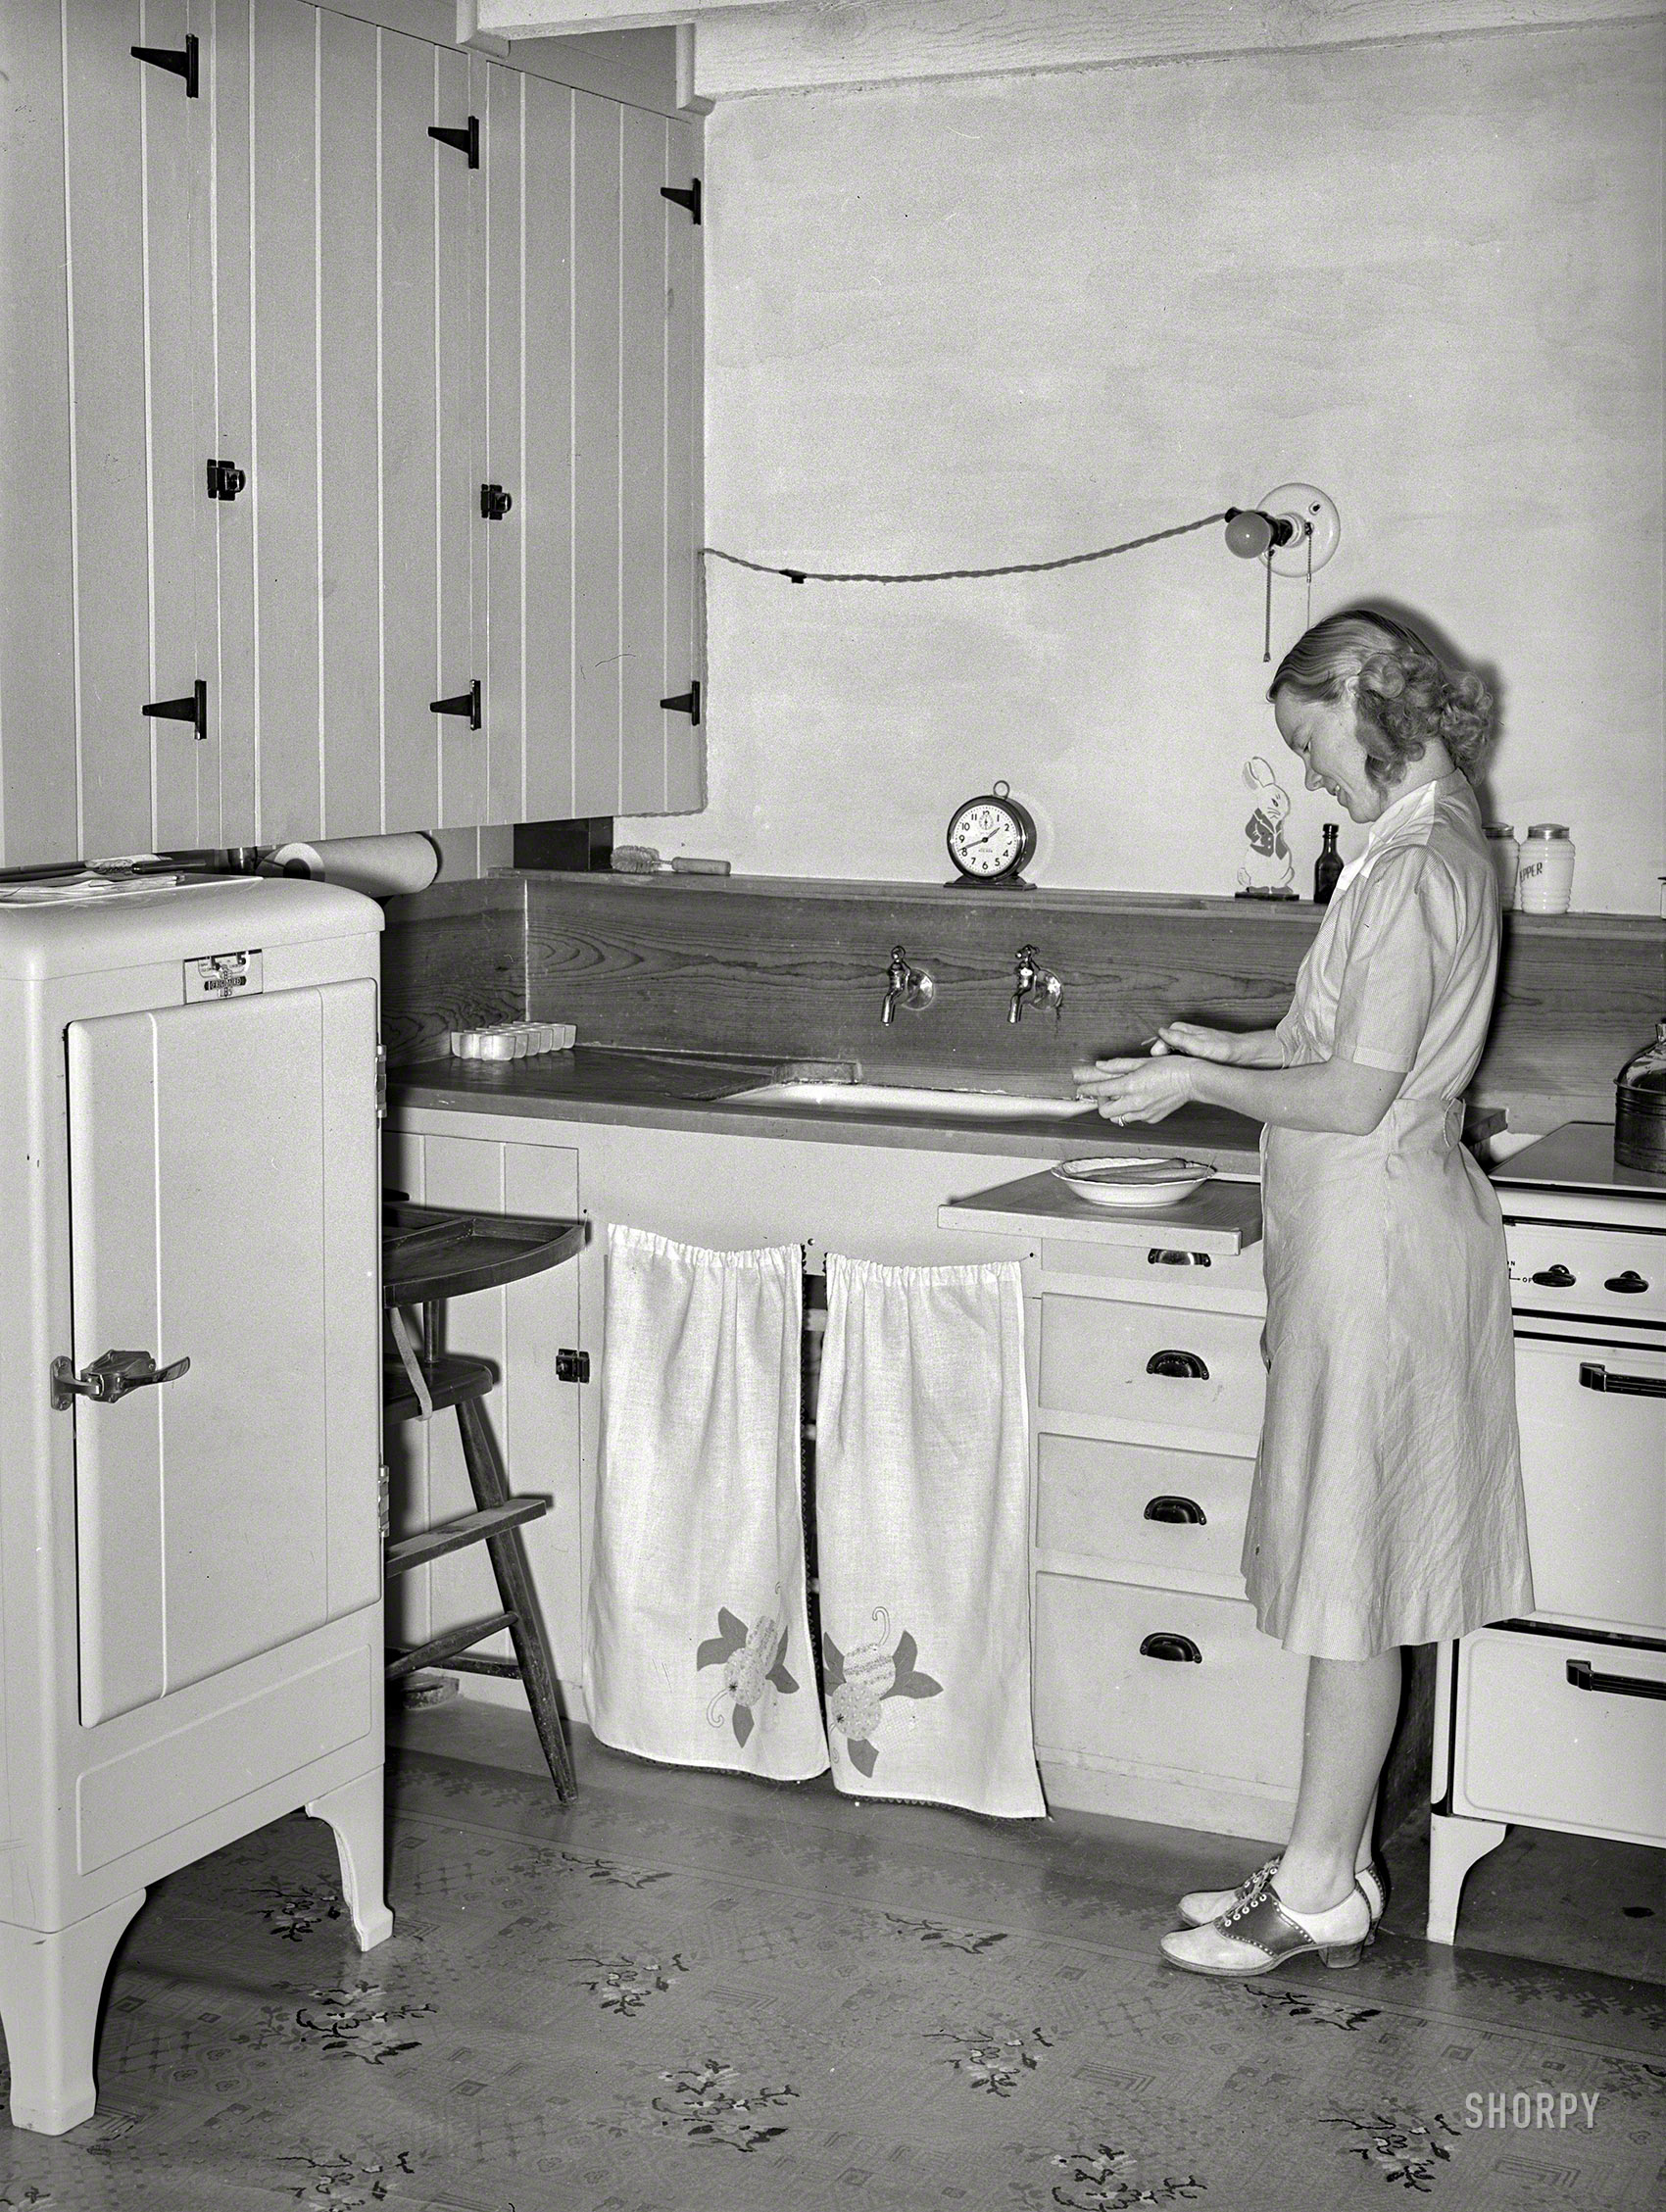 May 1940. "Wife of member of the Arizona part-time farms. Chandler Unit, Maricopa County, Arizona, in the kitchen of her apartment on the project." The lady last seen here. Medium format negative by Russell Lee. View full size.